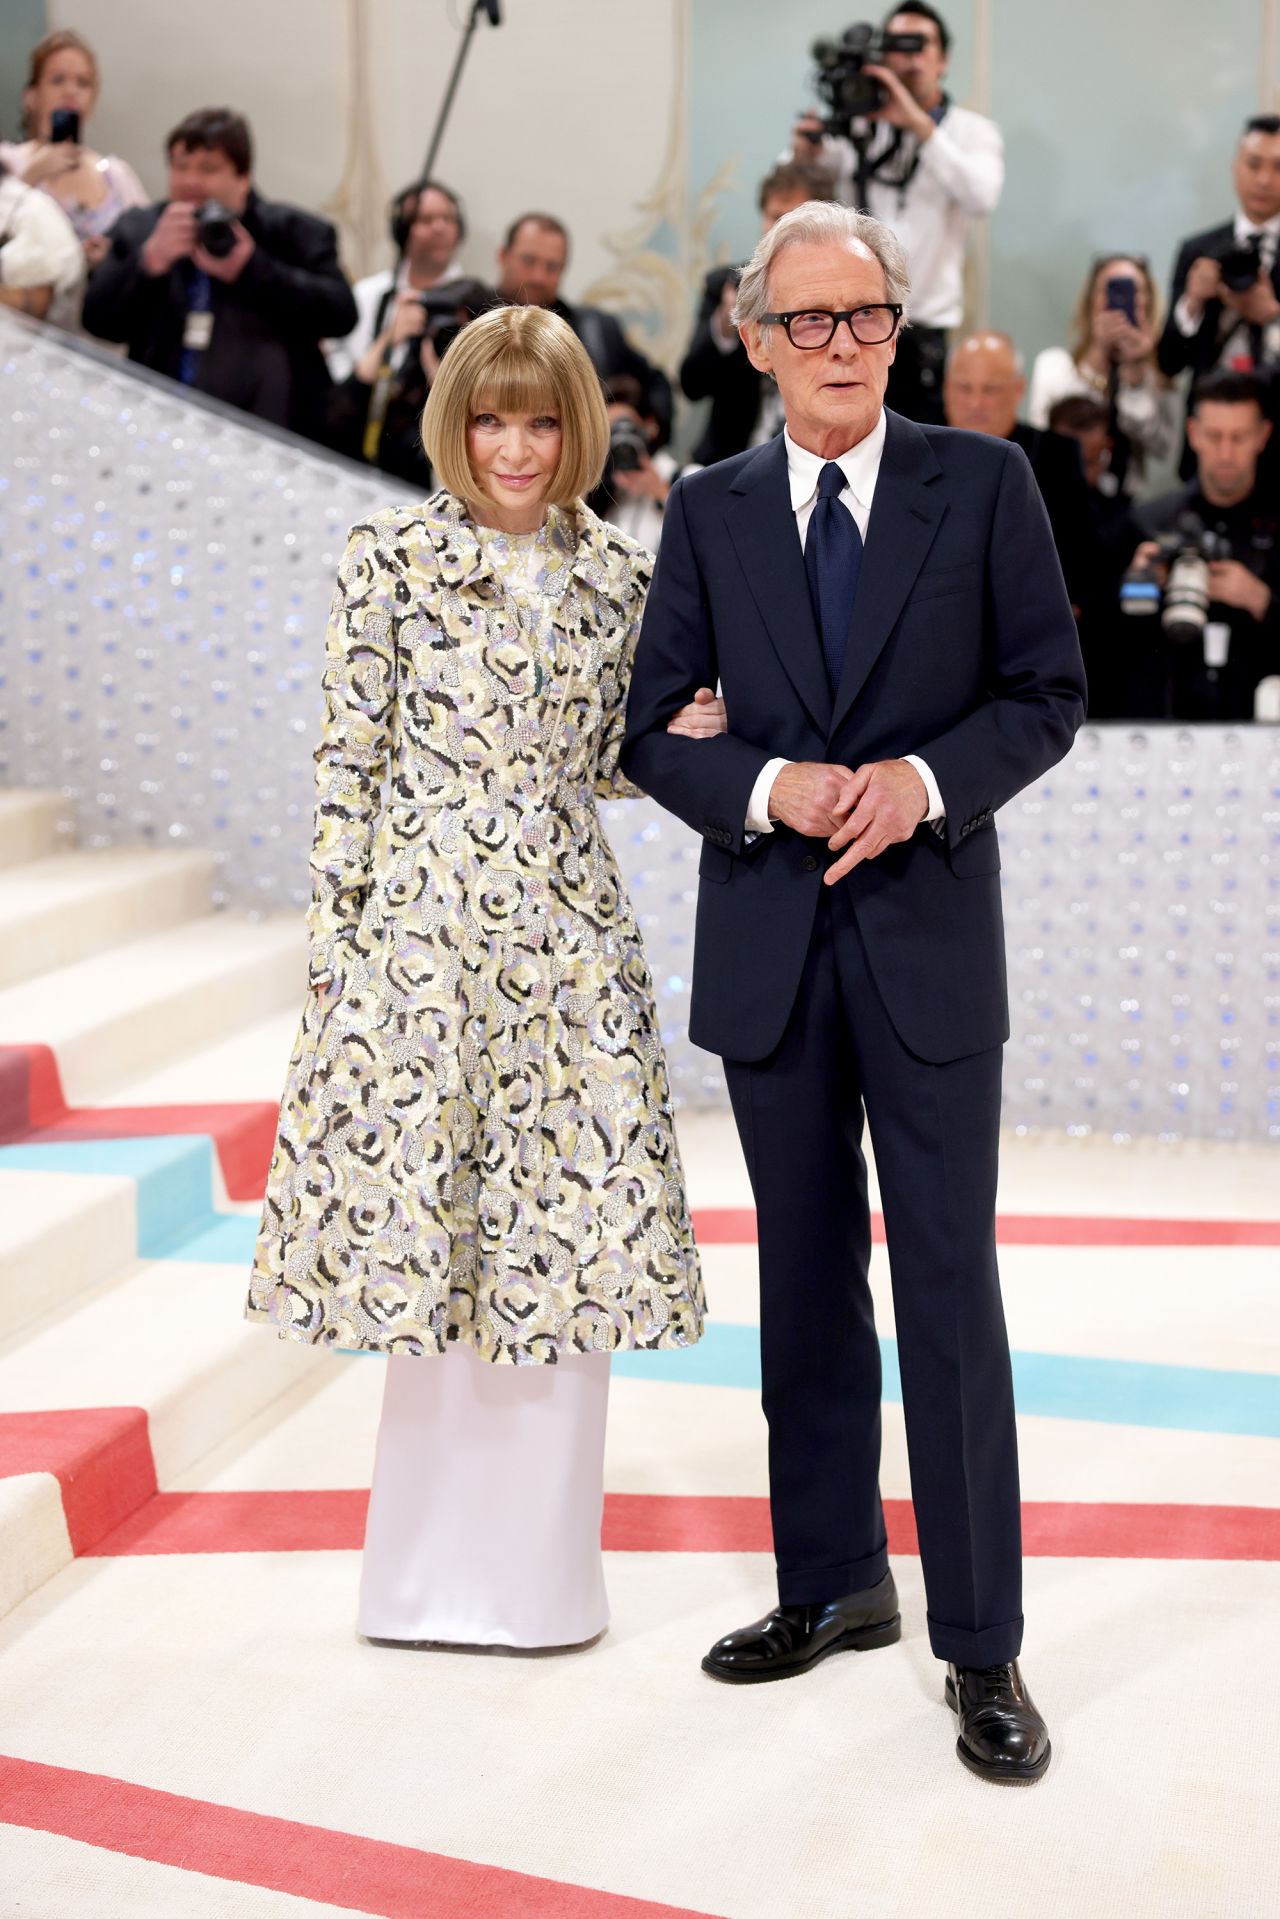 Vogue editorial director Anna Wintour arrived with actor Bill Nighy.